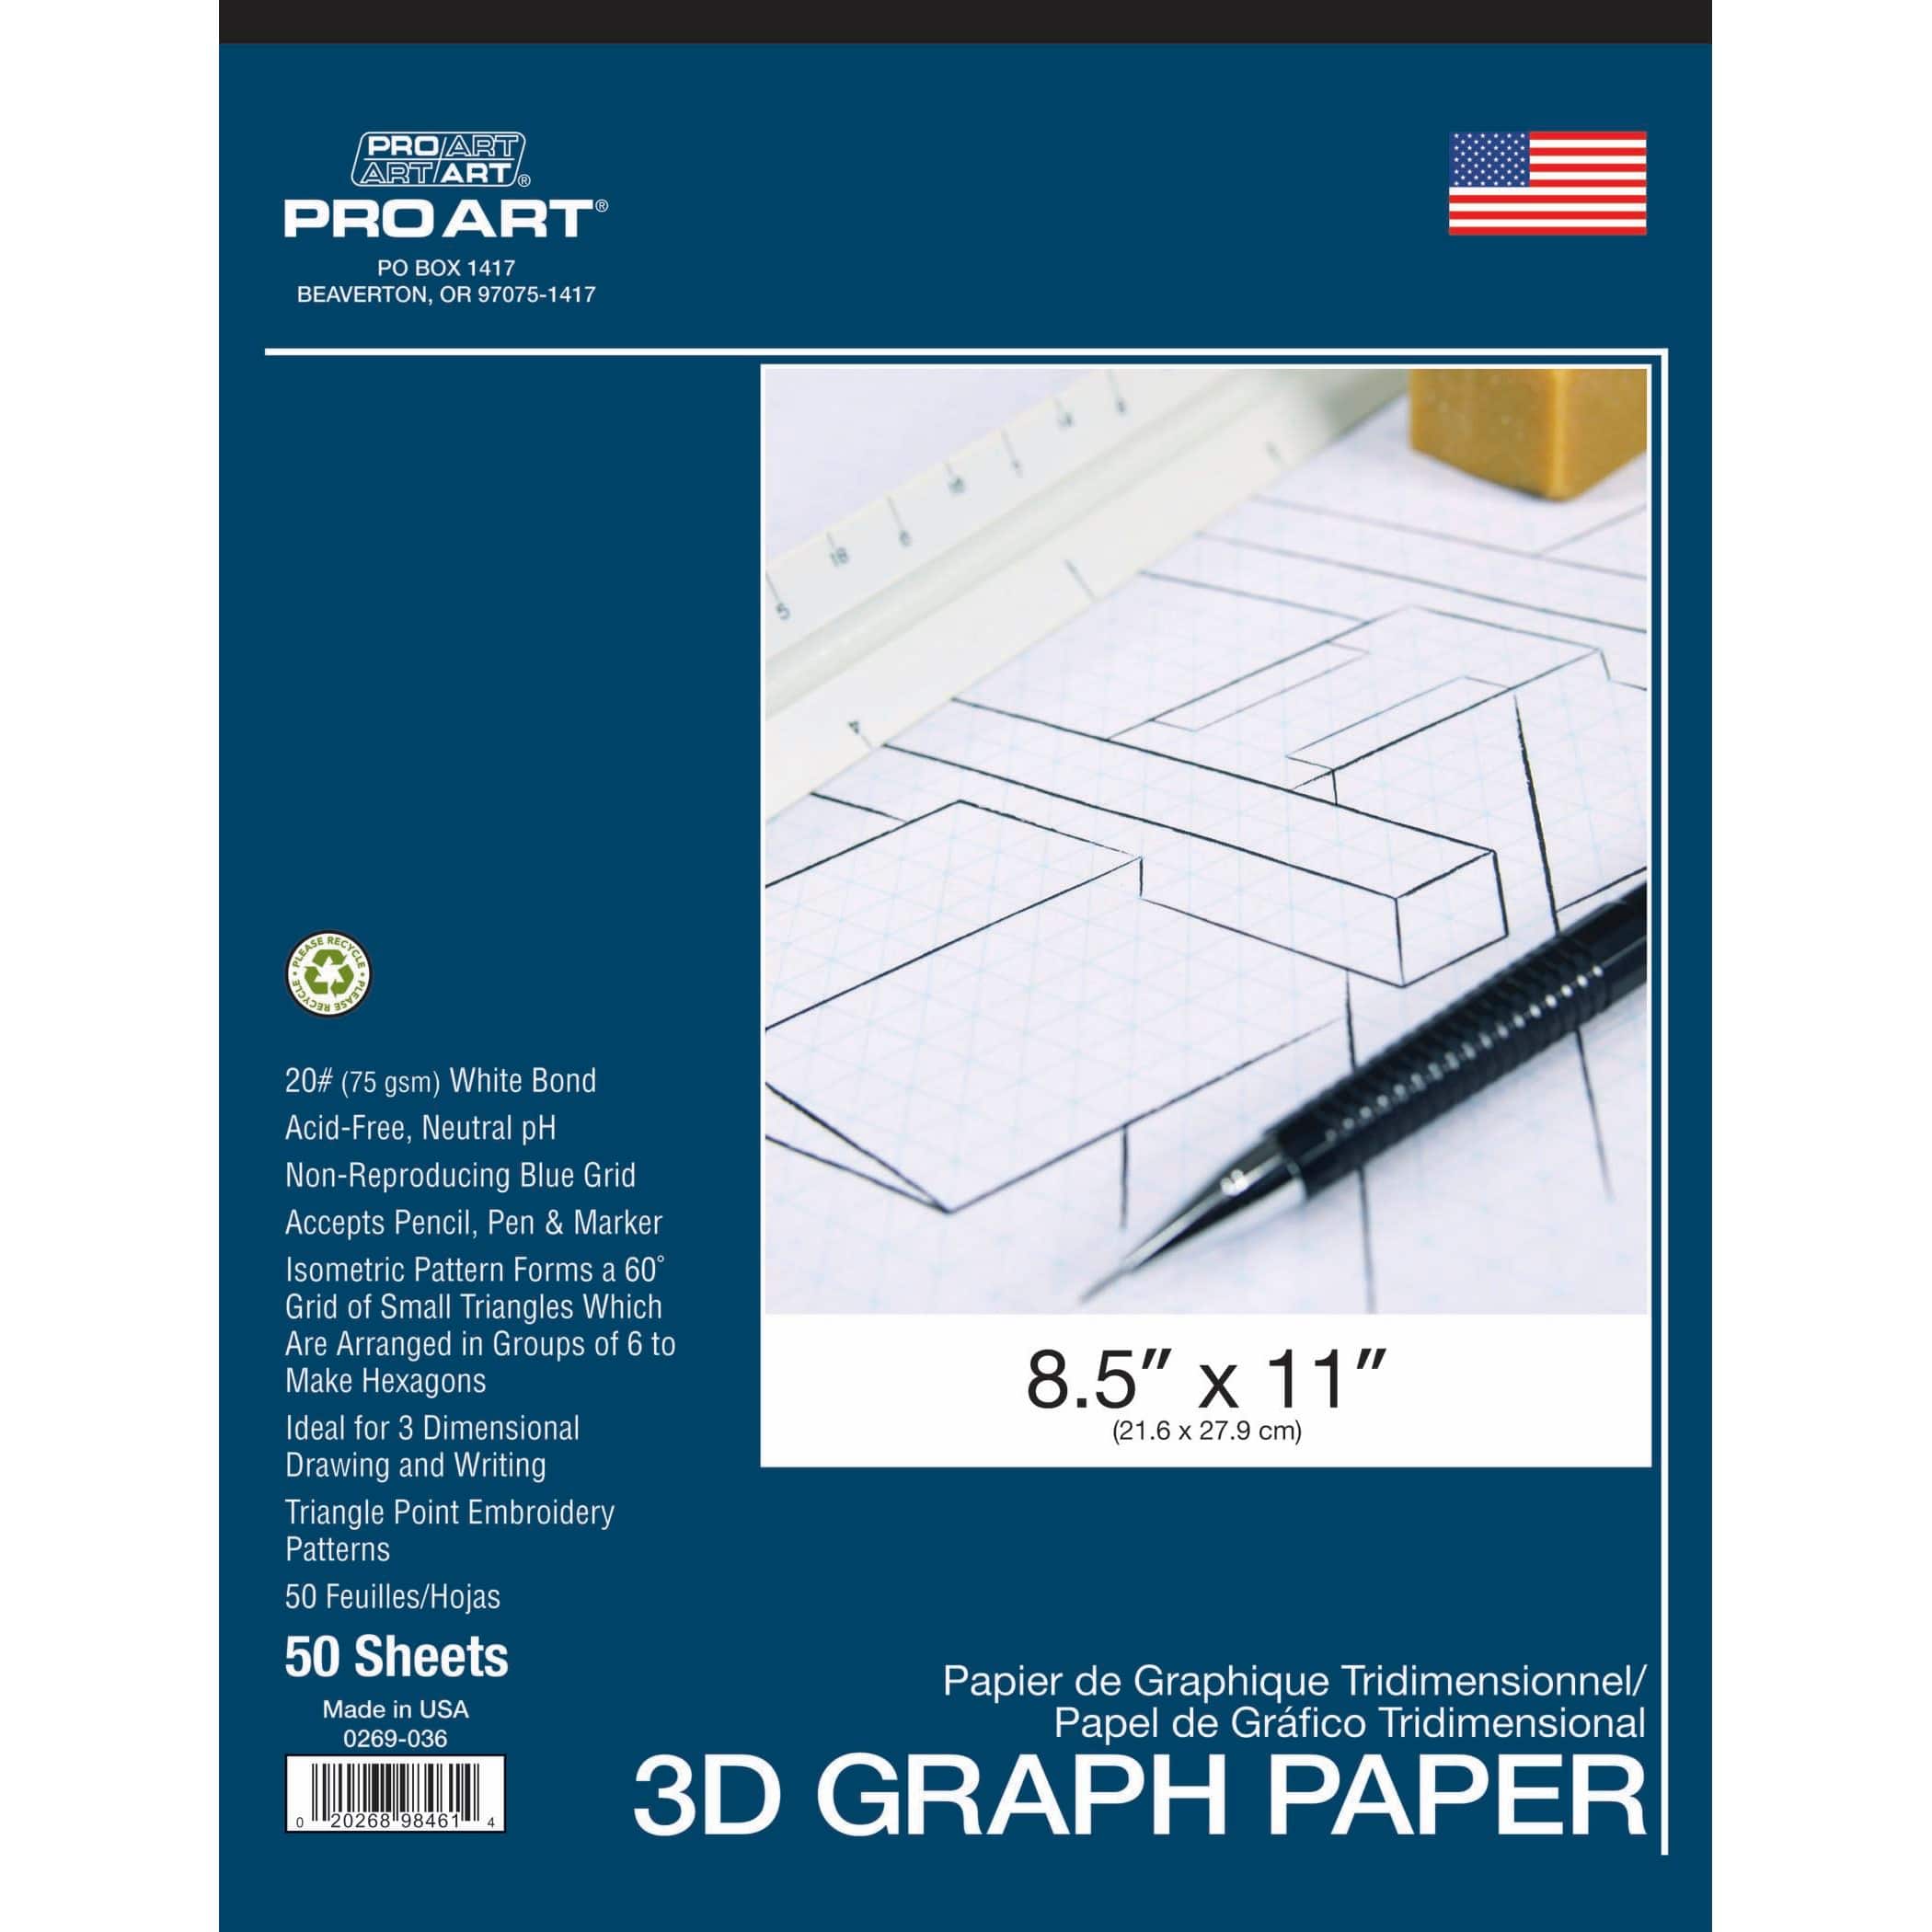 School Smart Graph Paper, 1/4 Inch Rule, 9 x 12 Inches, White, Pack of 500